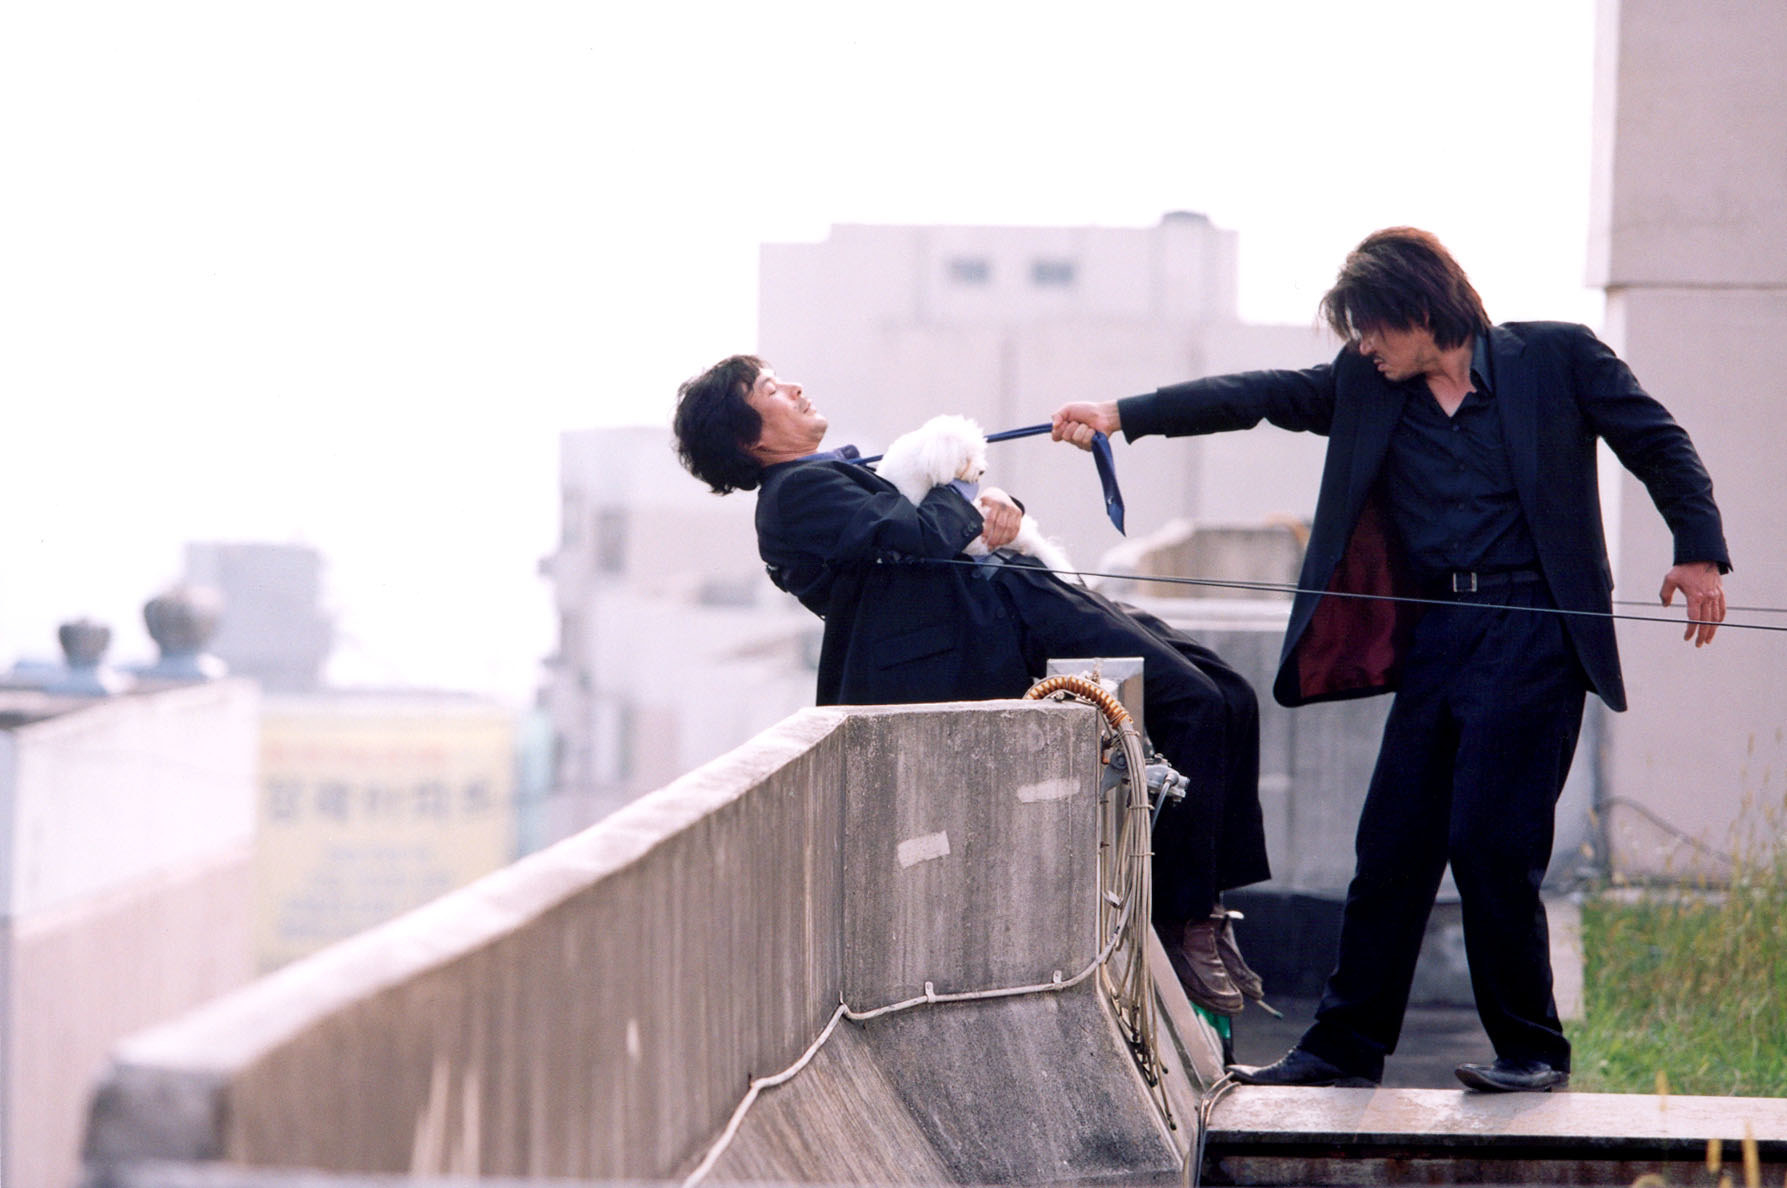 A person pointing a gun at a person on the ledge of a building